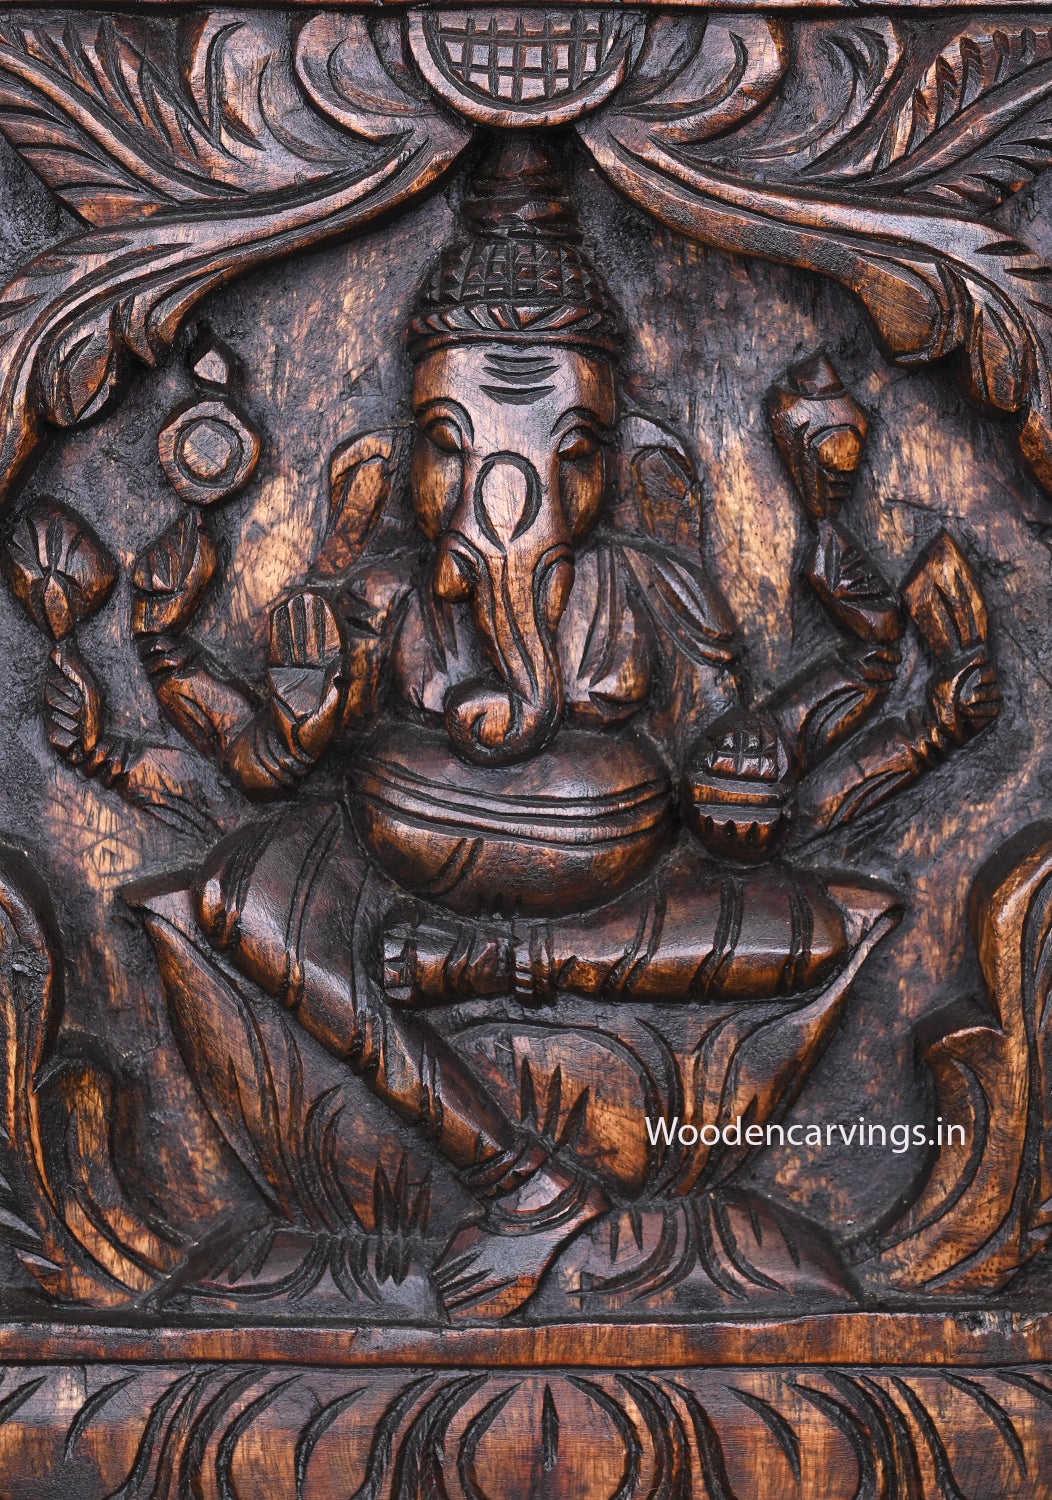 Eight Unique Forms of Asta Ganesha Vertical Wall Decor Dark Brown Finishing Wooden Wall Panel 48.5"